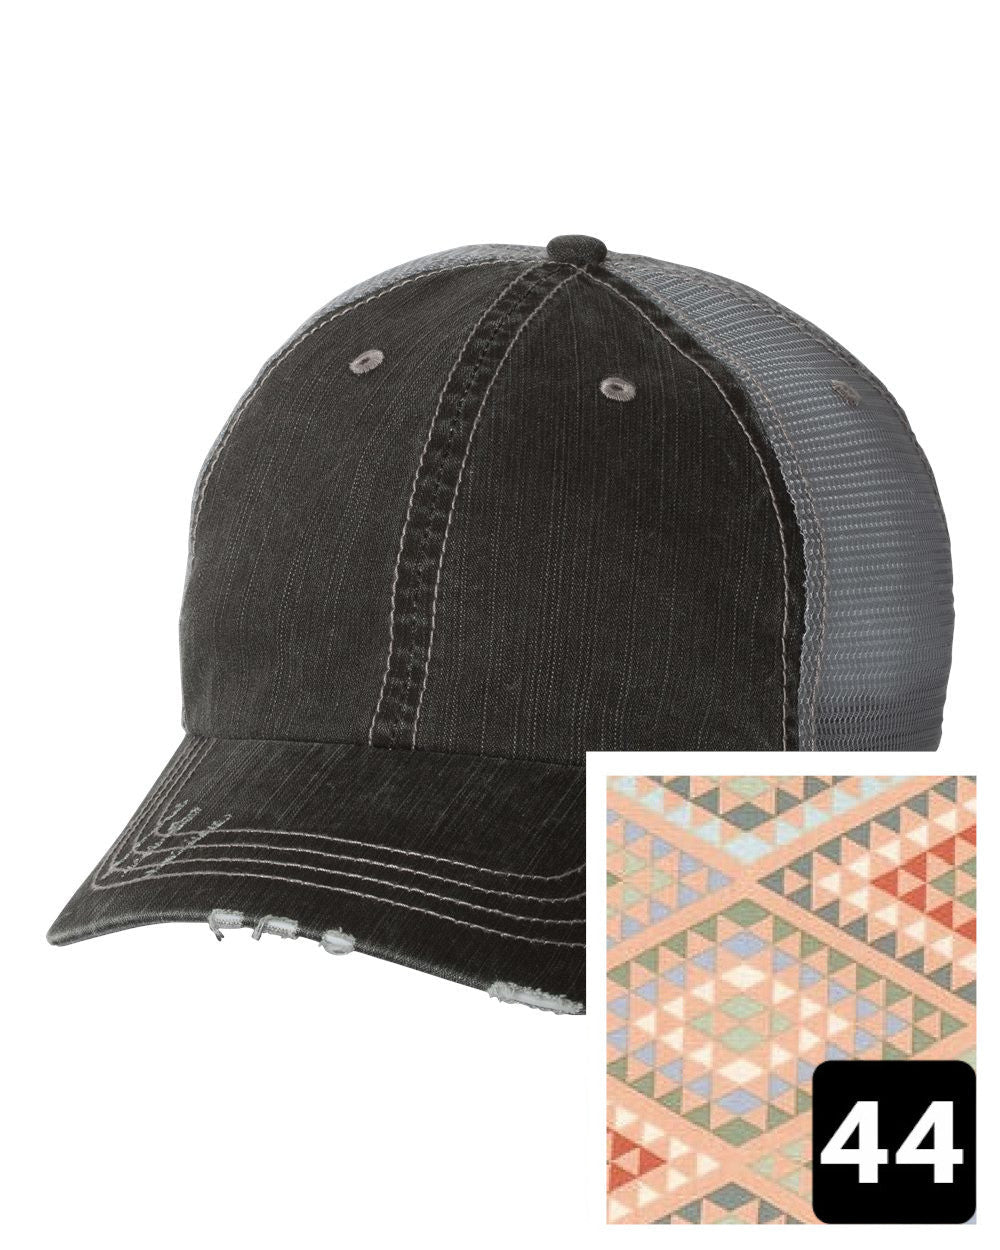 gray distressed trucker hat with navy coral and white chevron fabric state of Iowa